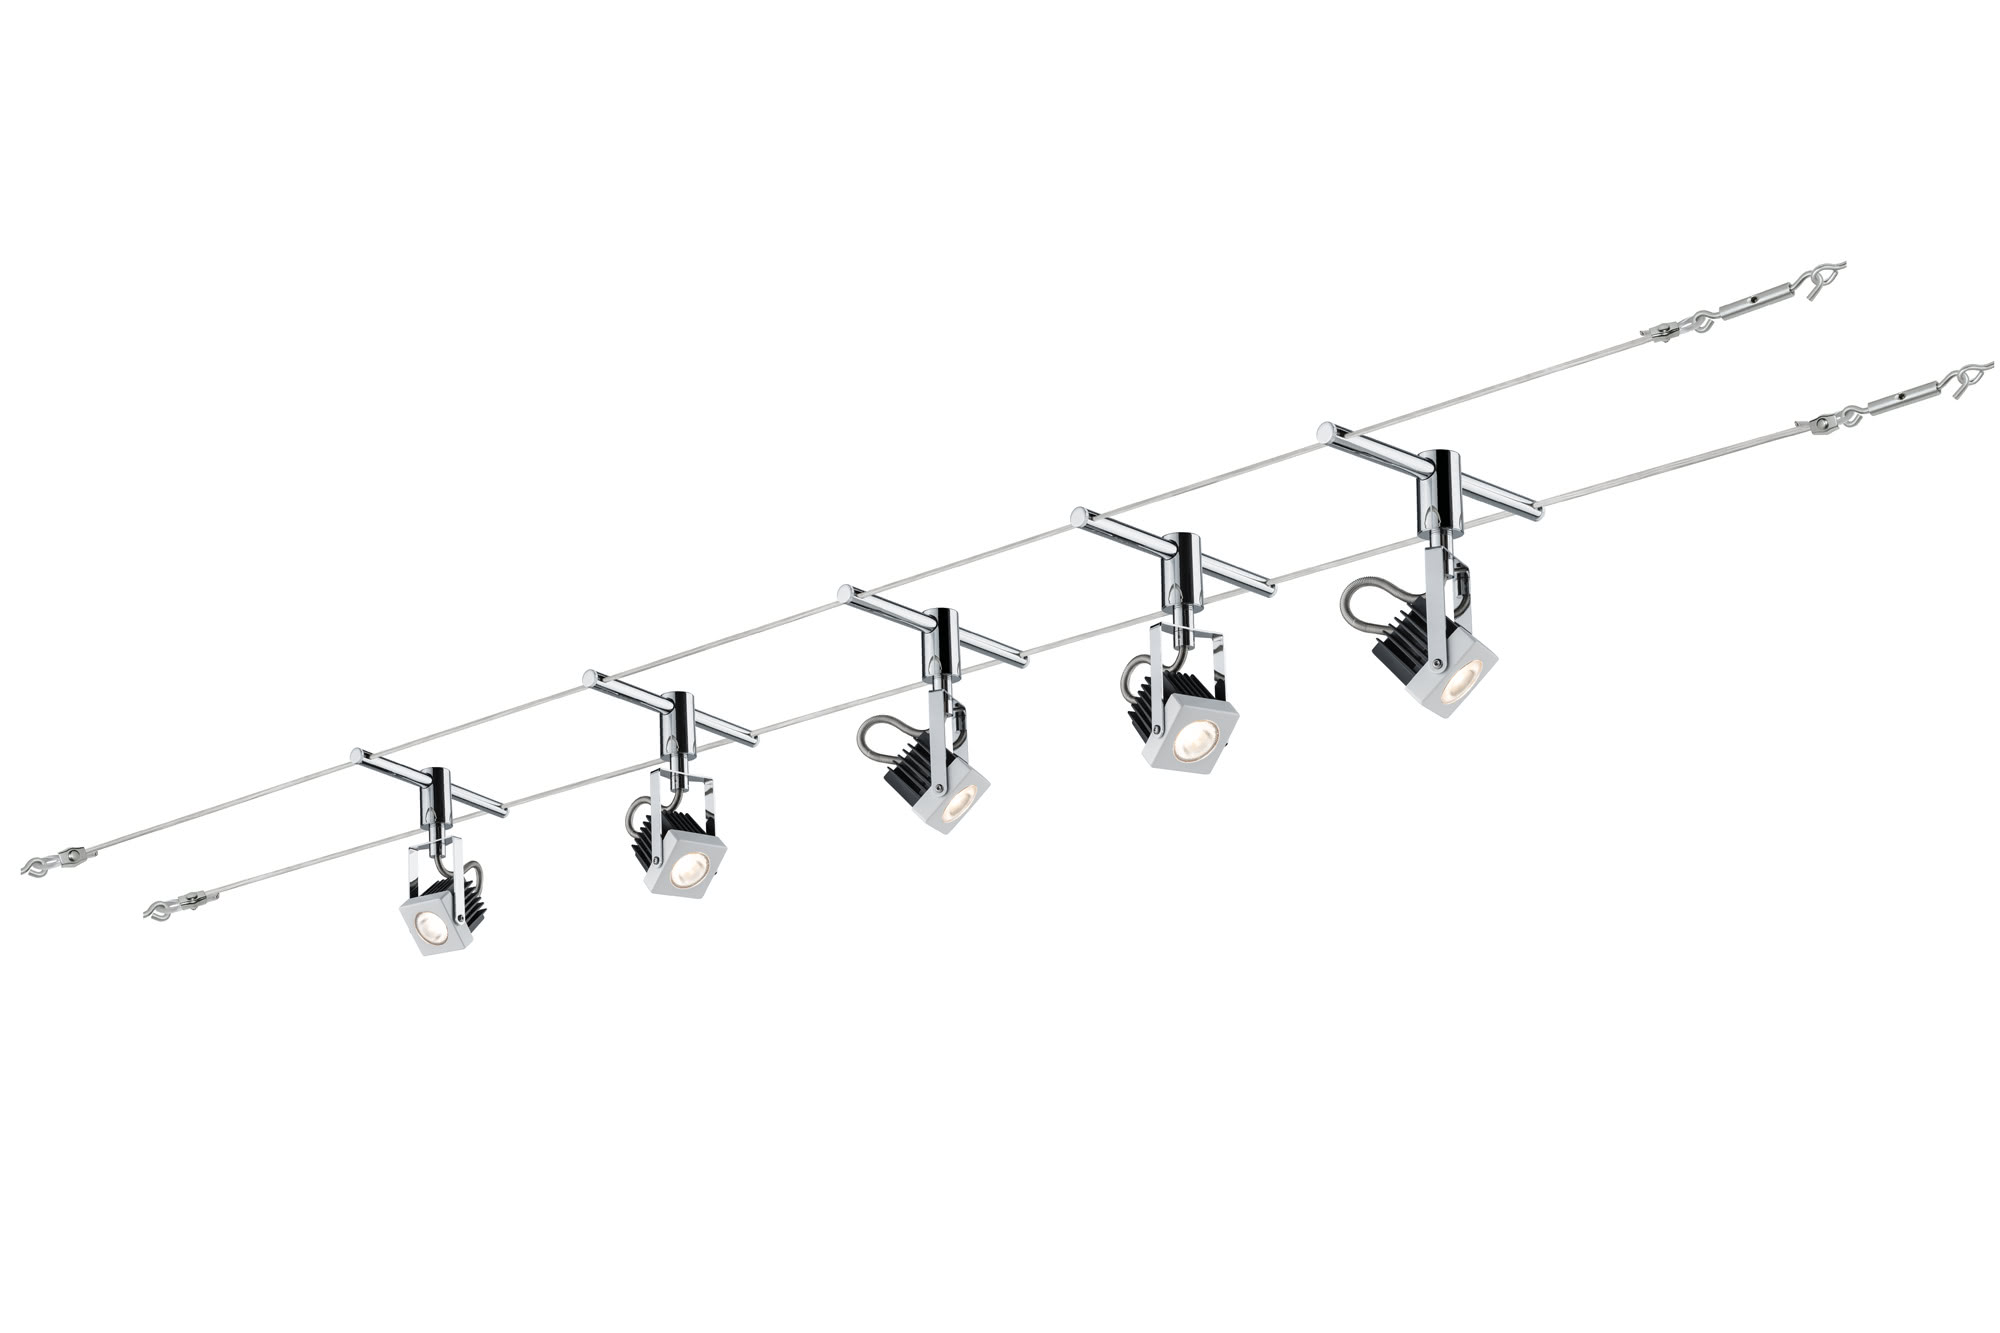 94082 Светильник струнный Mezzo 5x5W Ws/Chr The 5-lamp LED cable system -Mezzo- is an innovation in LED technology with a total output of 25В watt. The system is suitable for wall and ceiling mounting and is an -all-rounder- in the realm of individual lighting solutions with the appropriate accessories, such as diffusers. 940.82 Paulmann